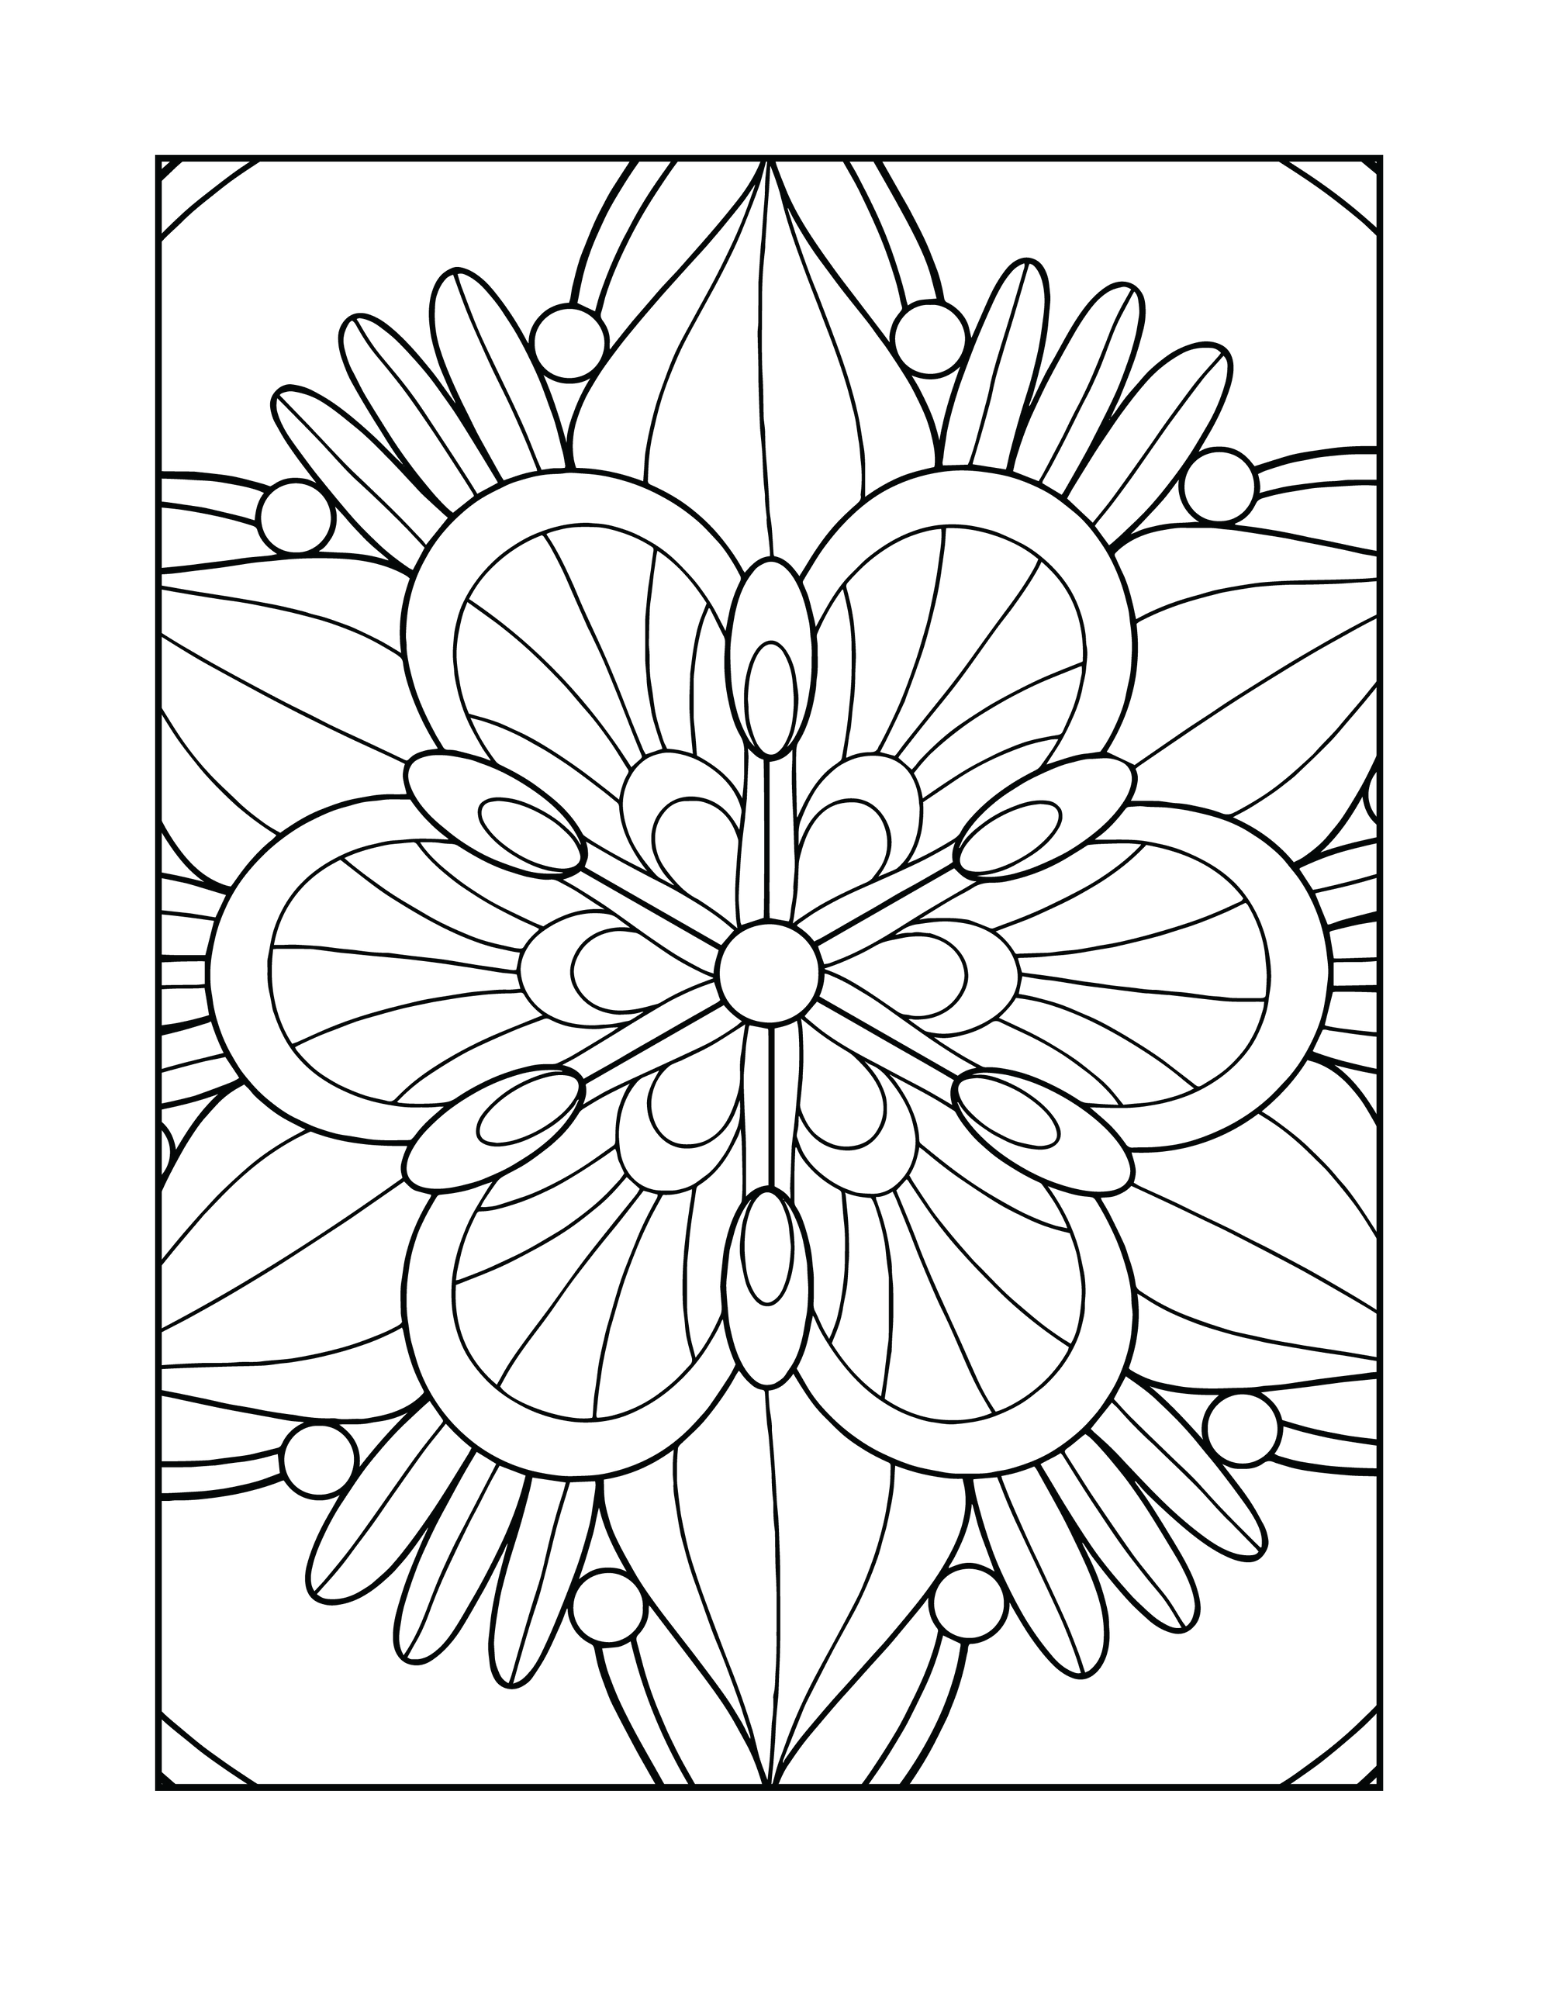 Mindful Patterns Coloring Book for Adults: 51 Relaxing Stress Relieving  Mindfulness Designs (Mandala, Floral, Doodle, Zen & Geometric)